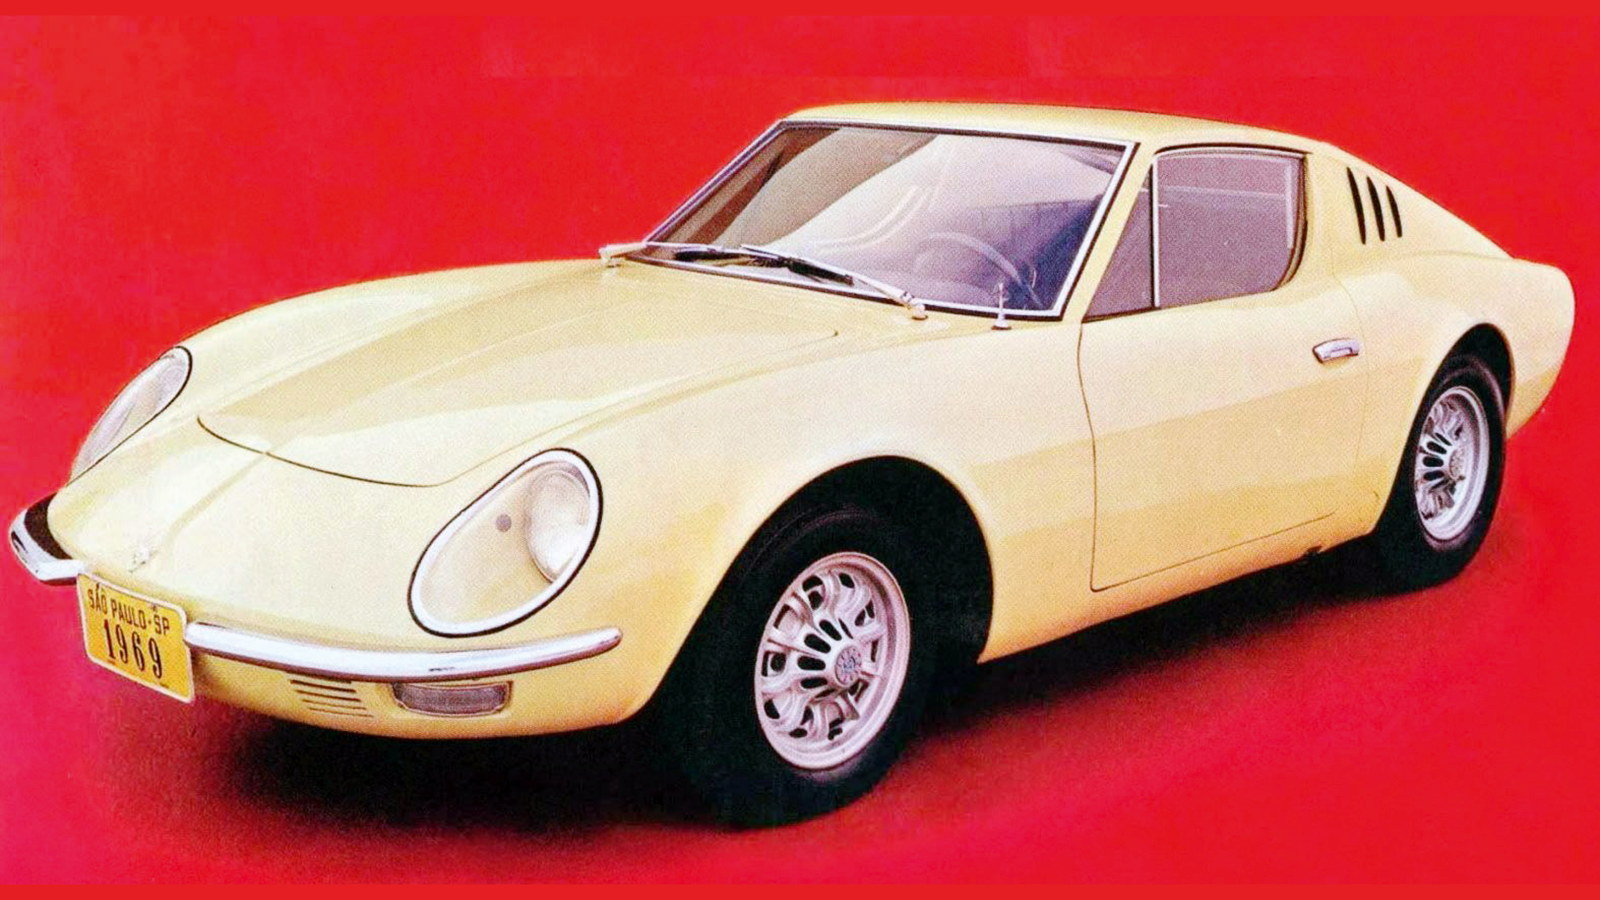 Puma GT – The Iconic Brazilian Sports Car Of The 1960s